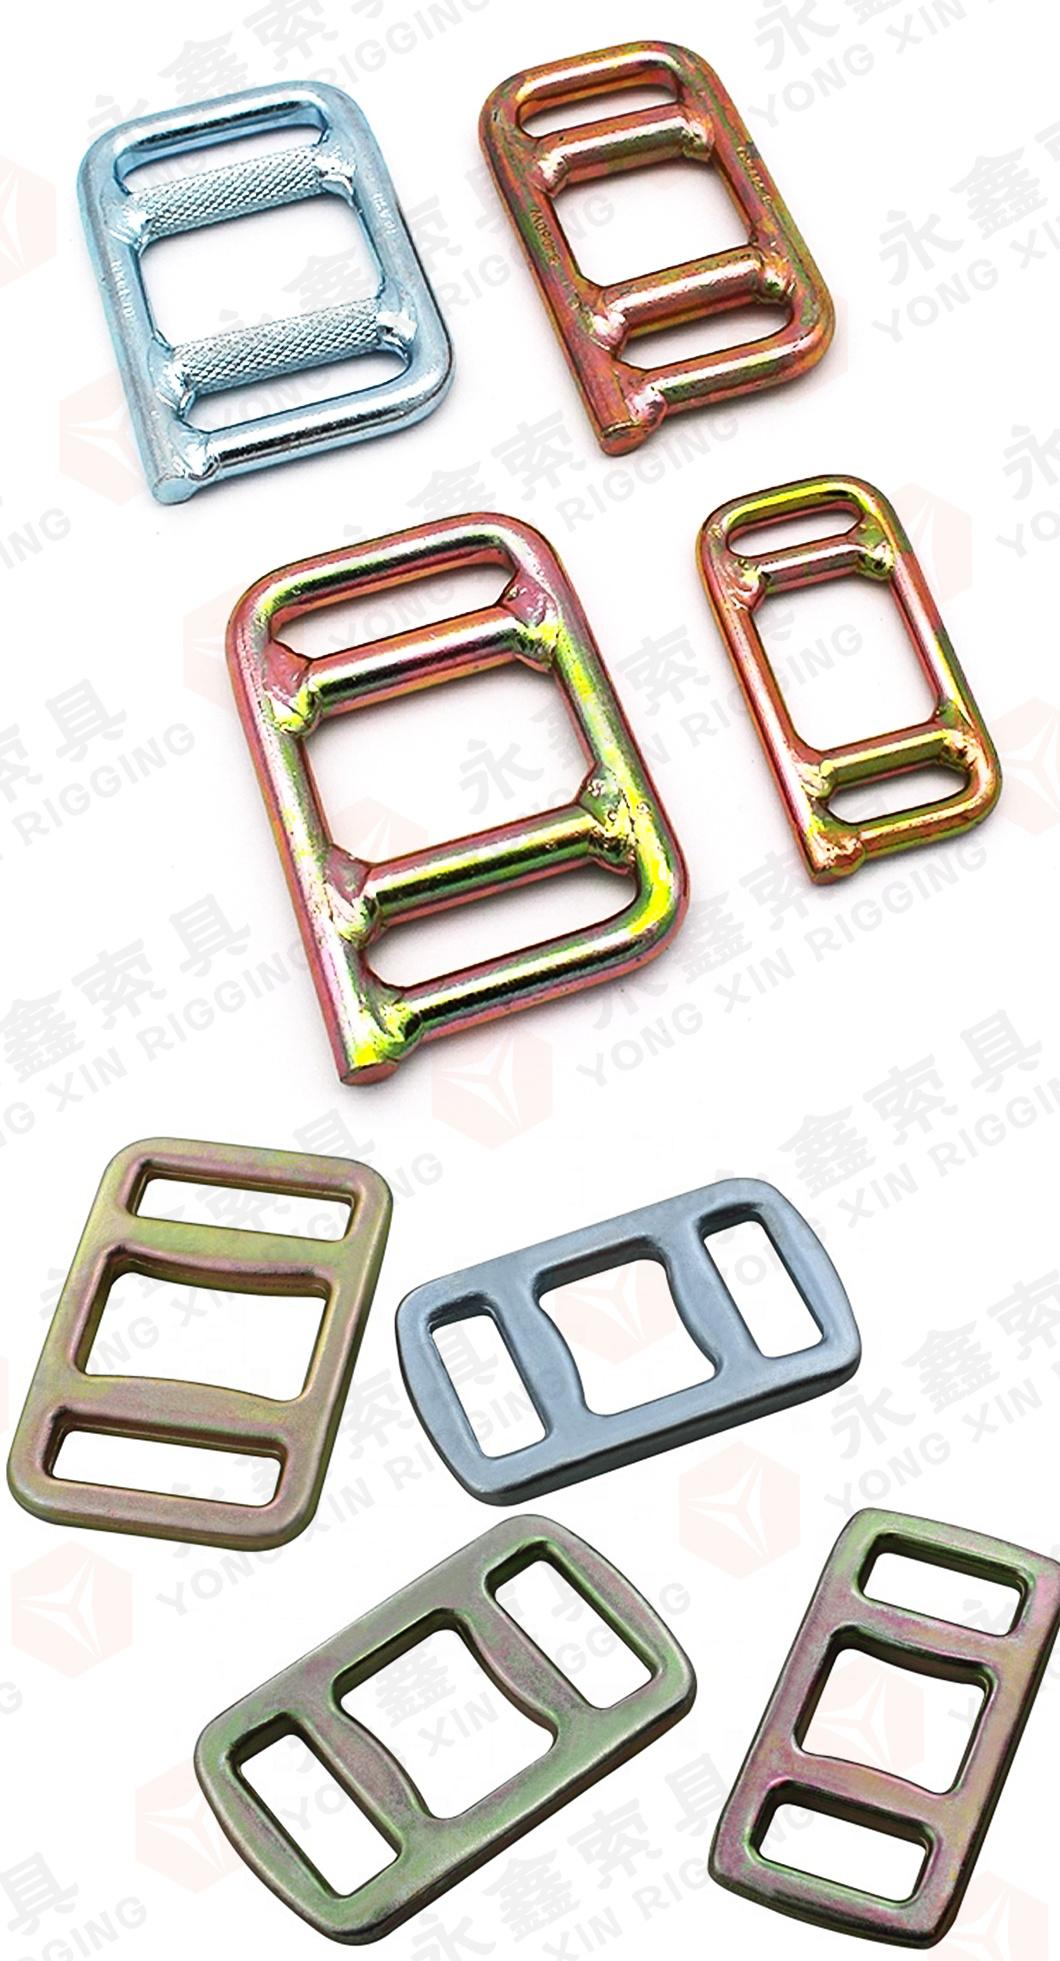 New Design Strap Adjuster One Way Lashing Buckle Made in China